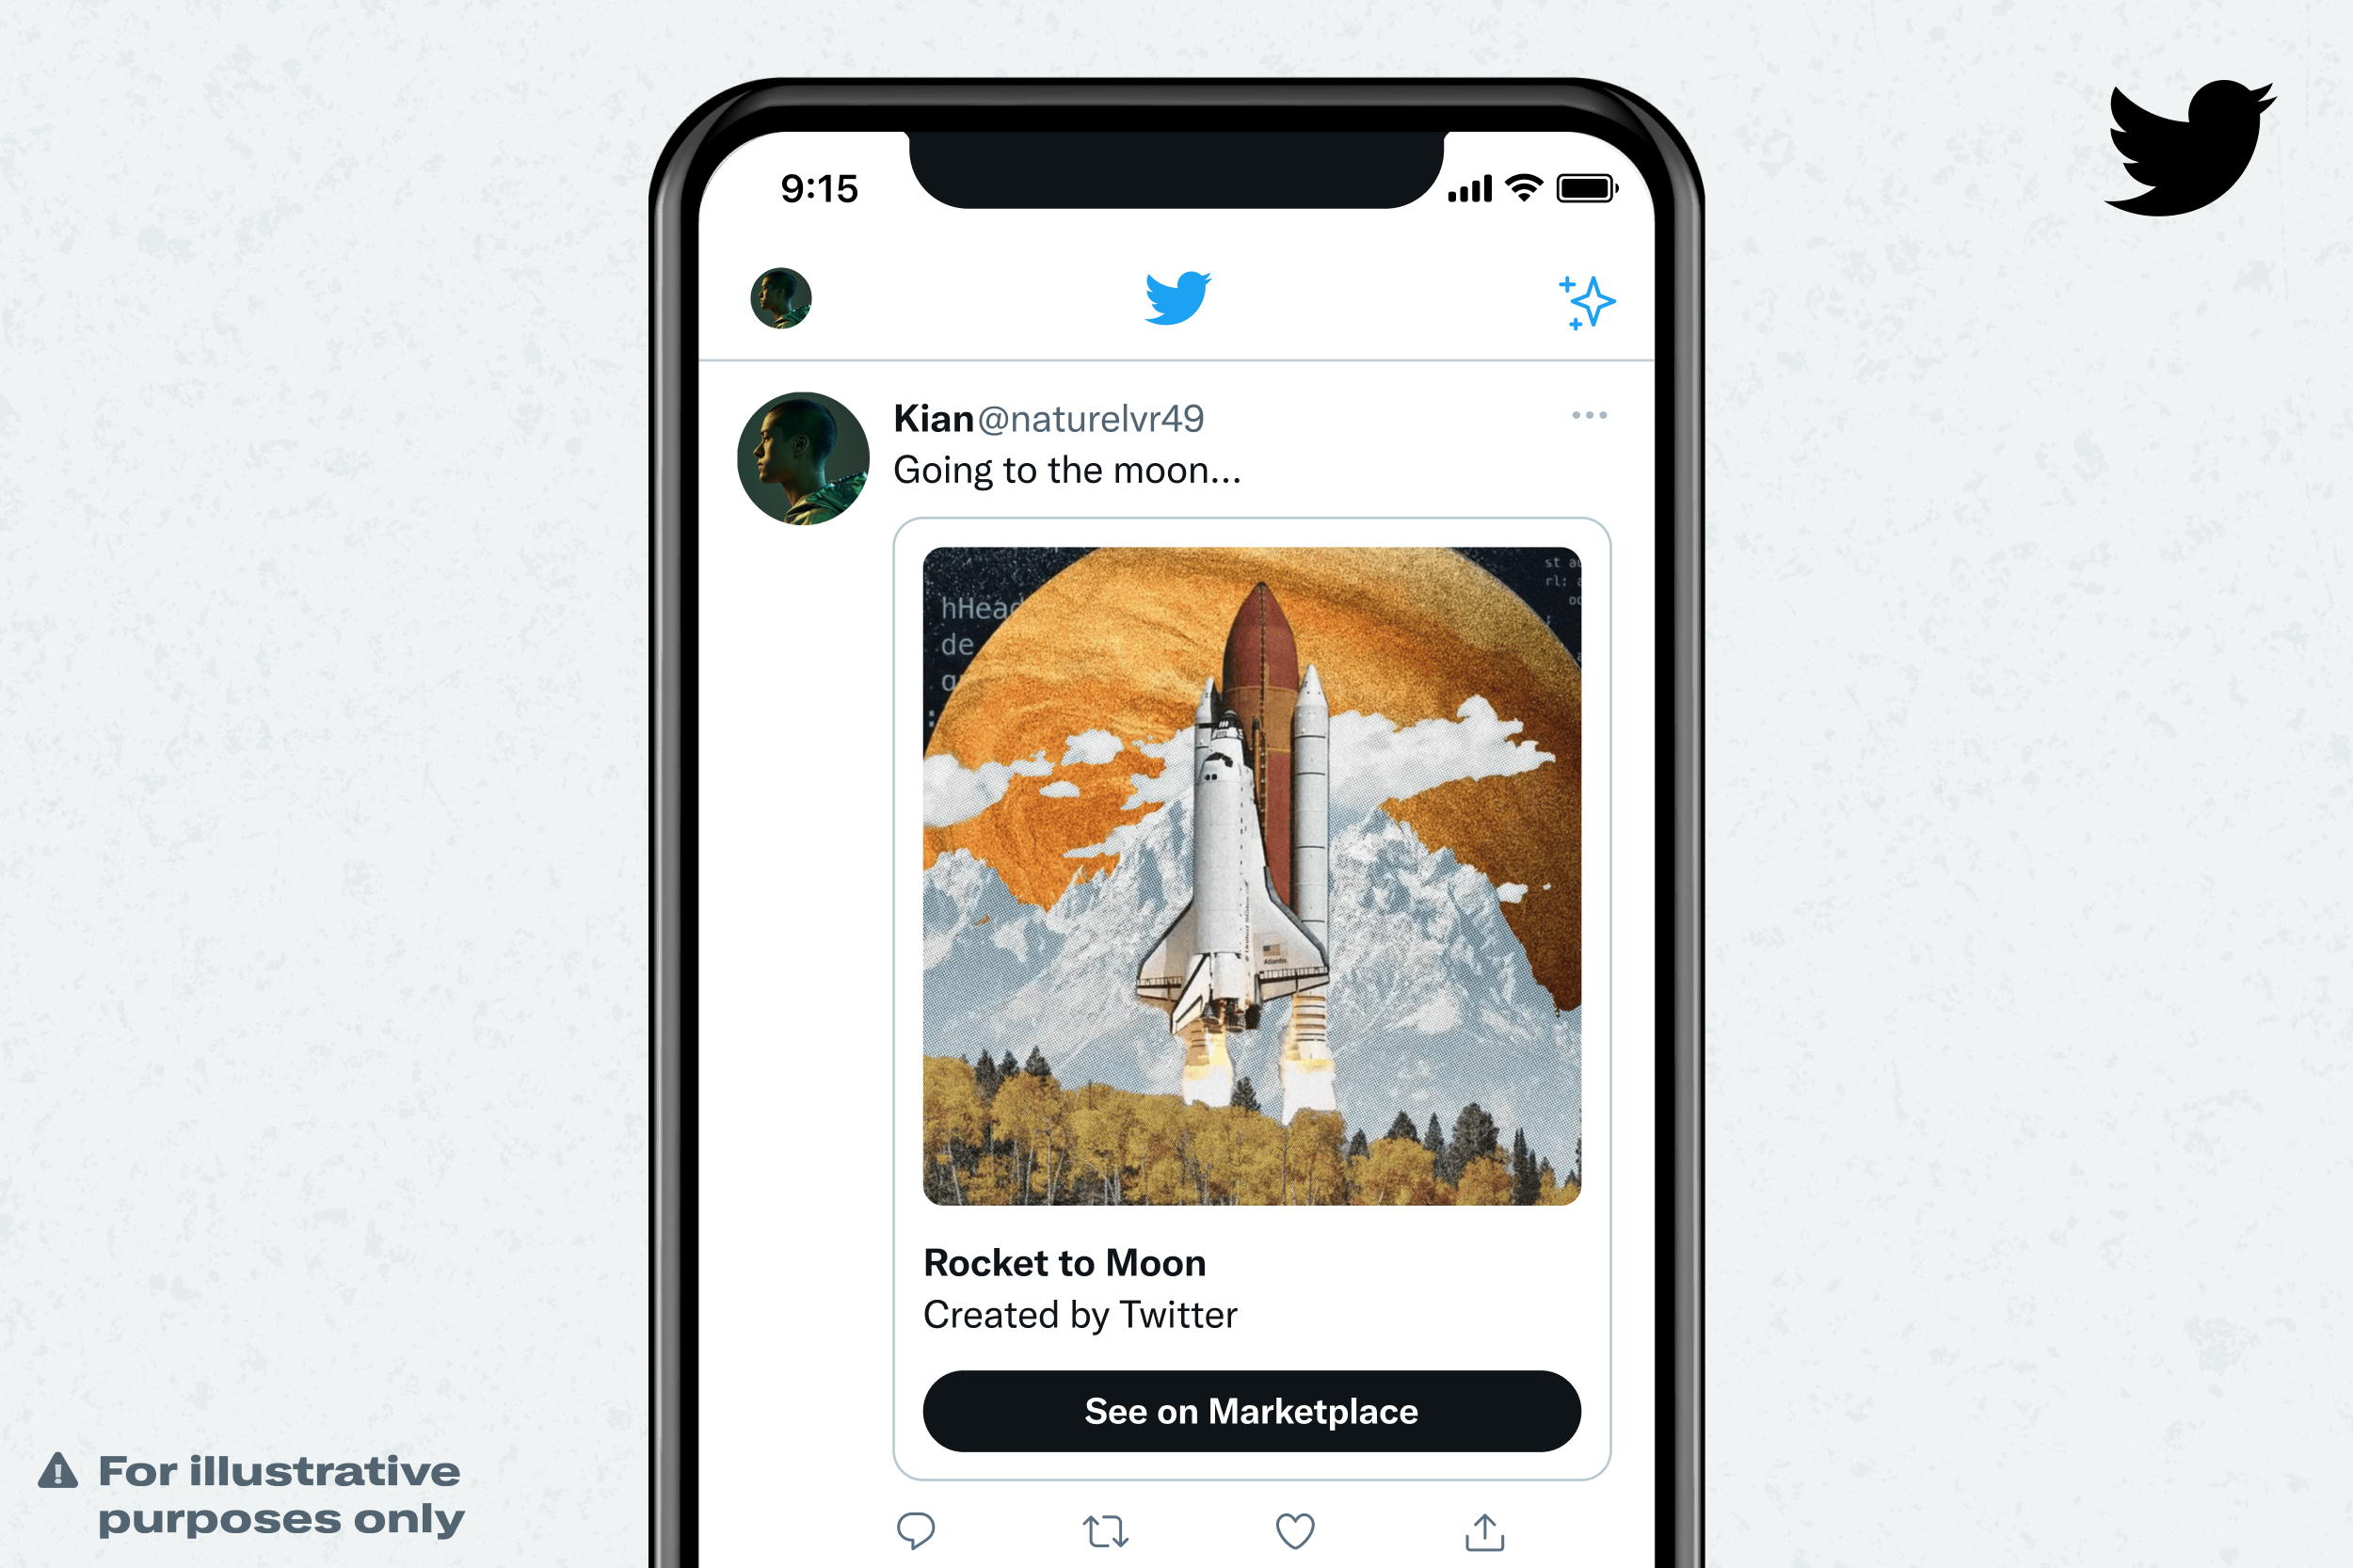 Twitter Reveals 'NFT Tweet Tiles' in Order to 'Impact' the Social Media Experience